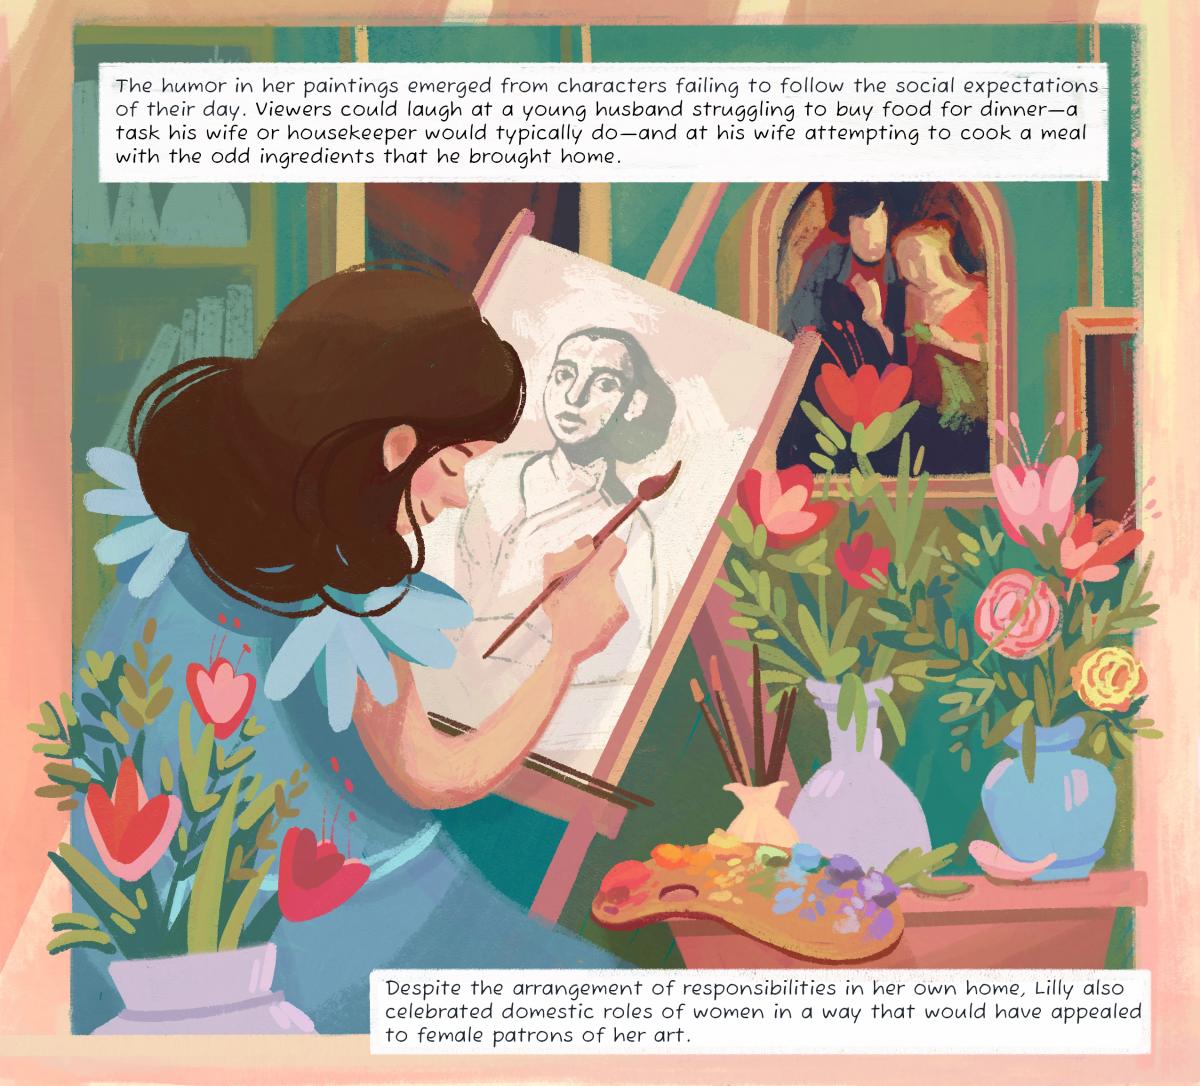 An illustrated rendering of Lilly painting at an easel surrounded by flowers, with written description.